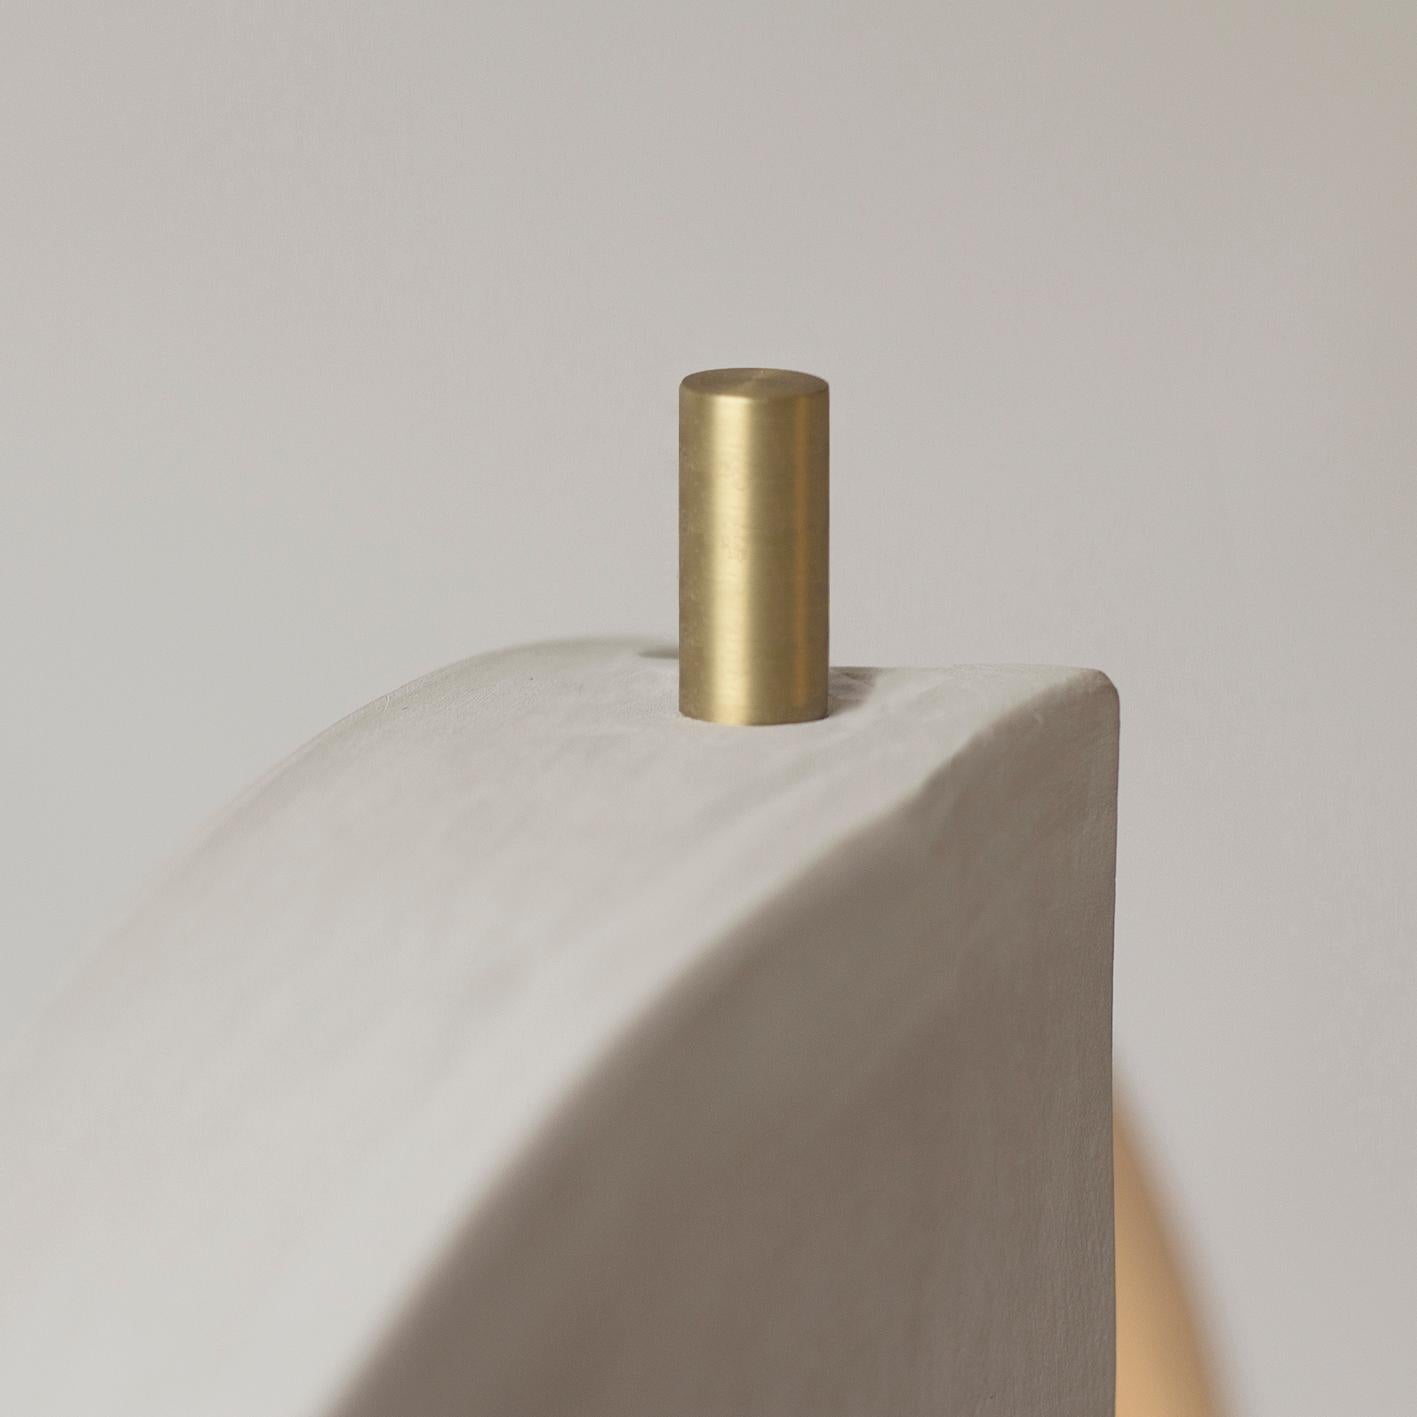 Minimalist-styled sand ceramic table lamp reveals the textures and colors gradian of its materials, handmade movements, and unexpected organic form.
Slowly air-dried for more than 30 days, until it reaches a few hours into a low temperature hoven,